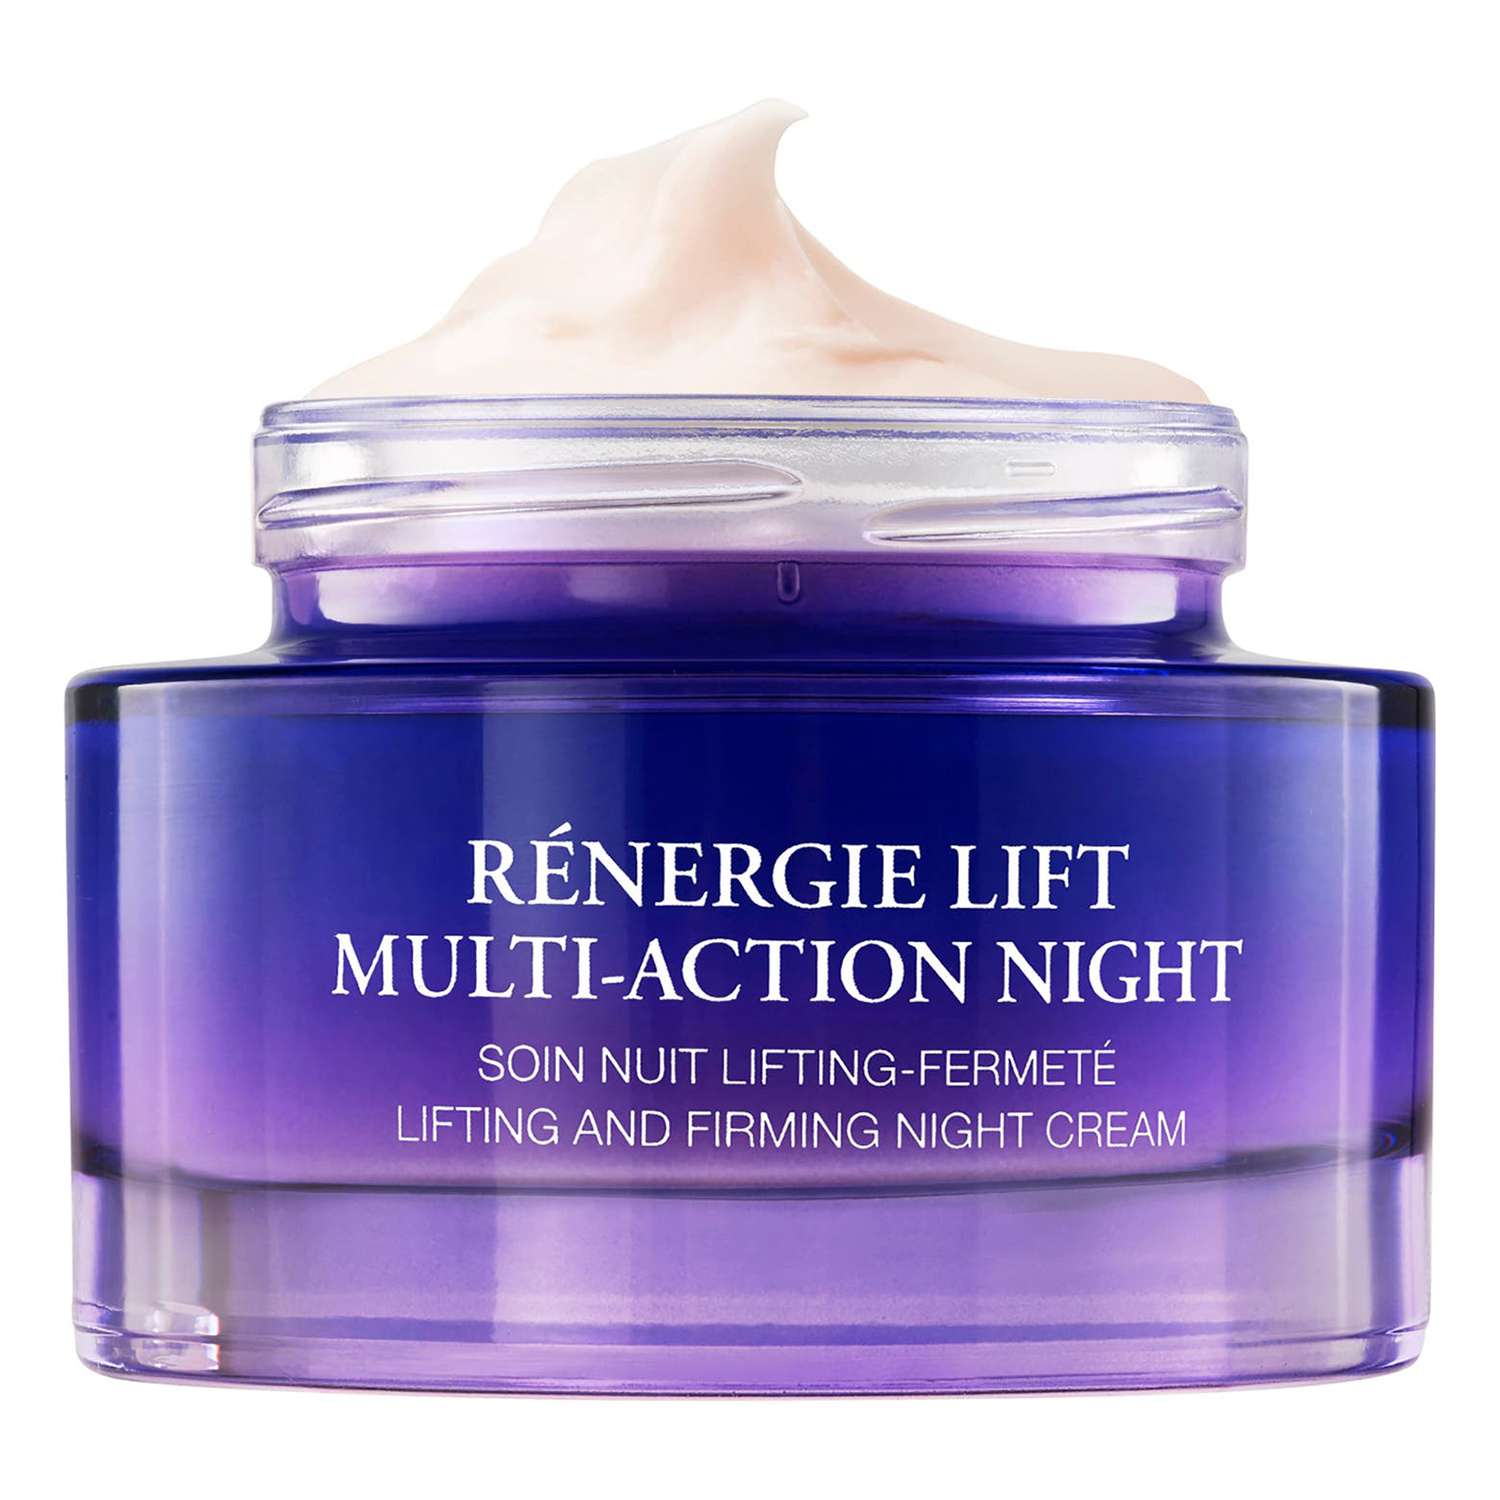 RENERGIE lift Multi-Action Lifting & Firming Night Cream